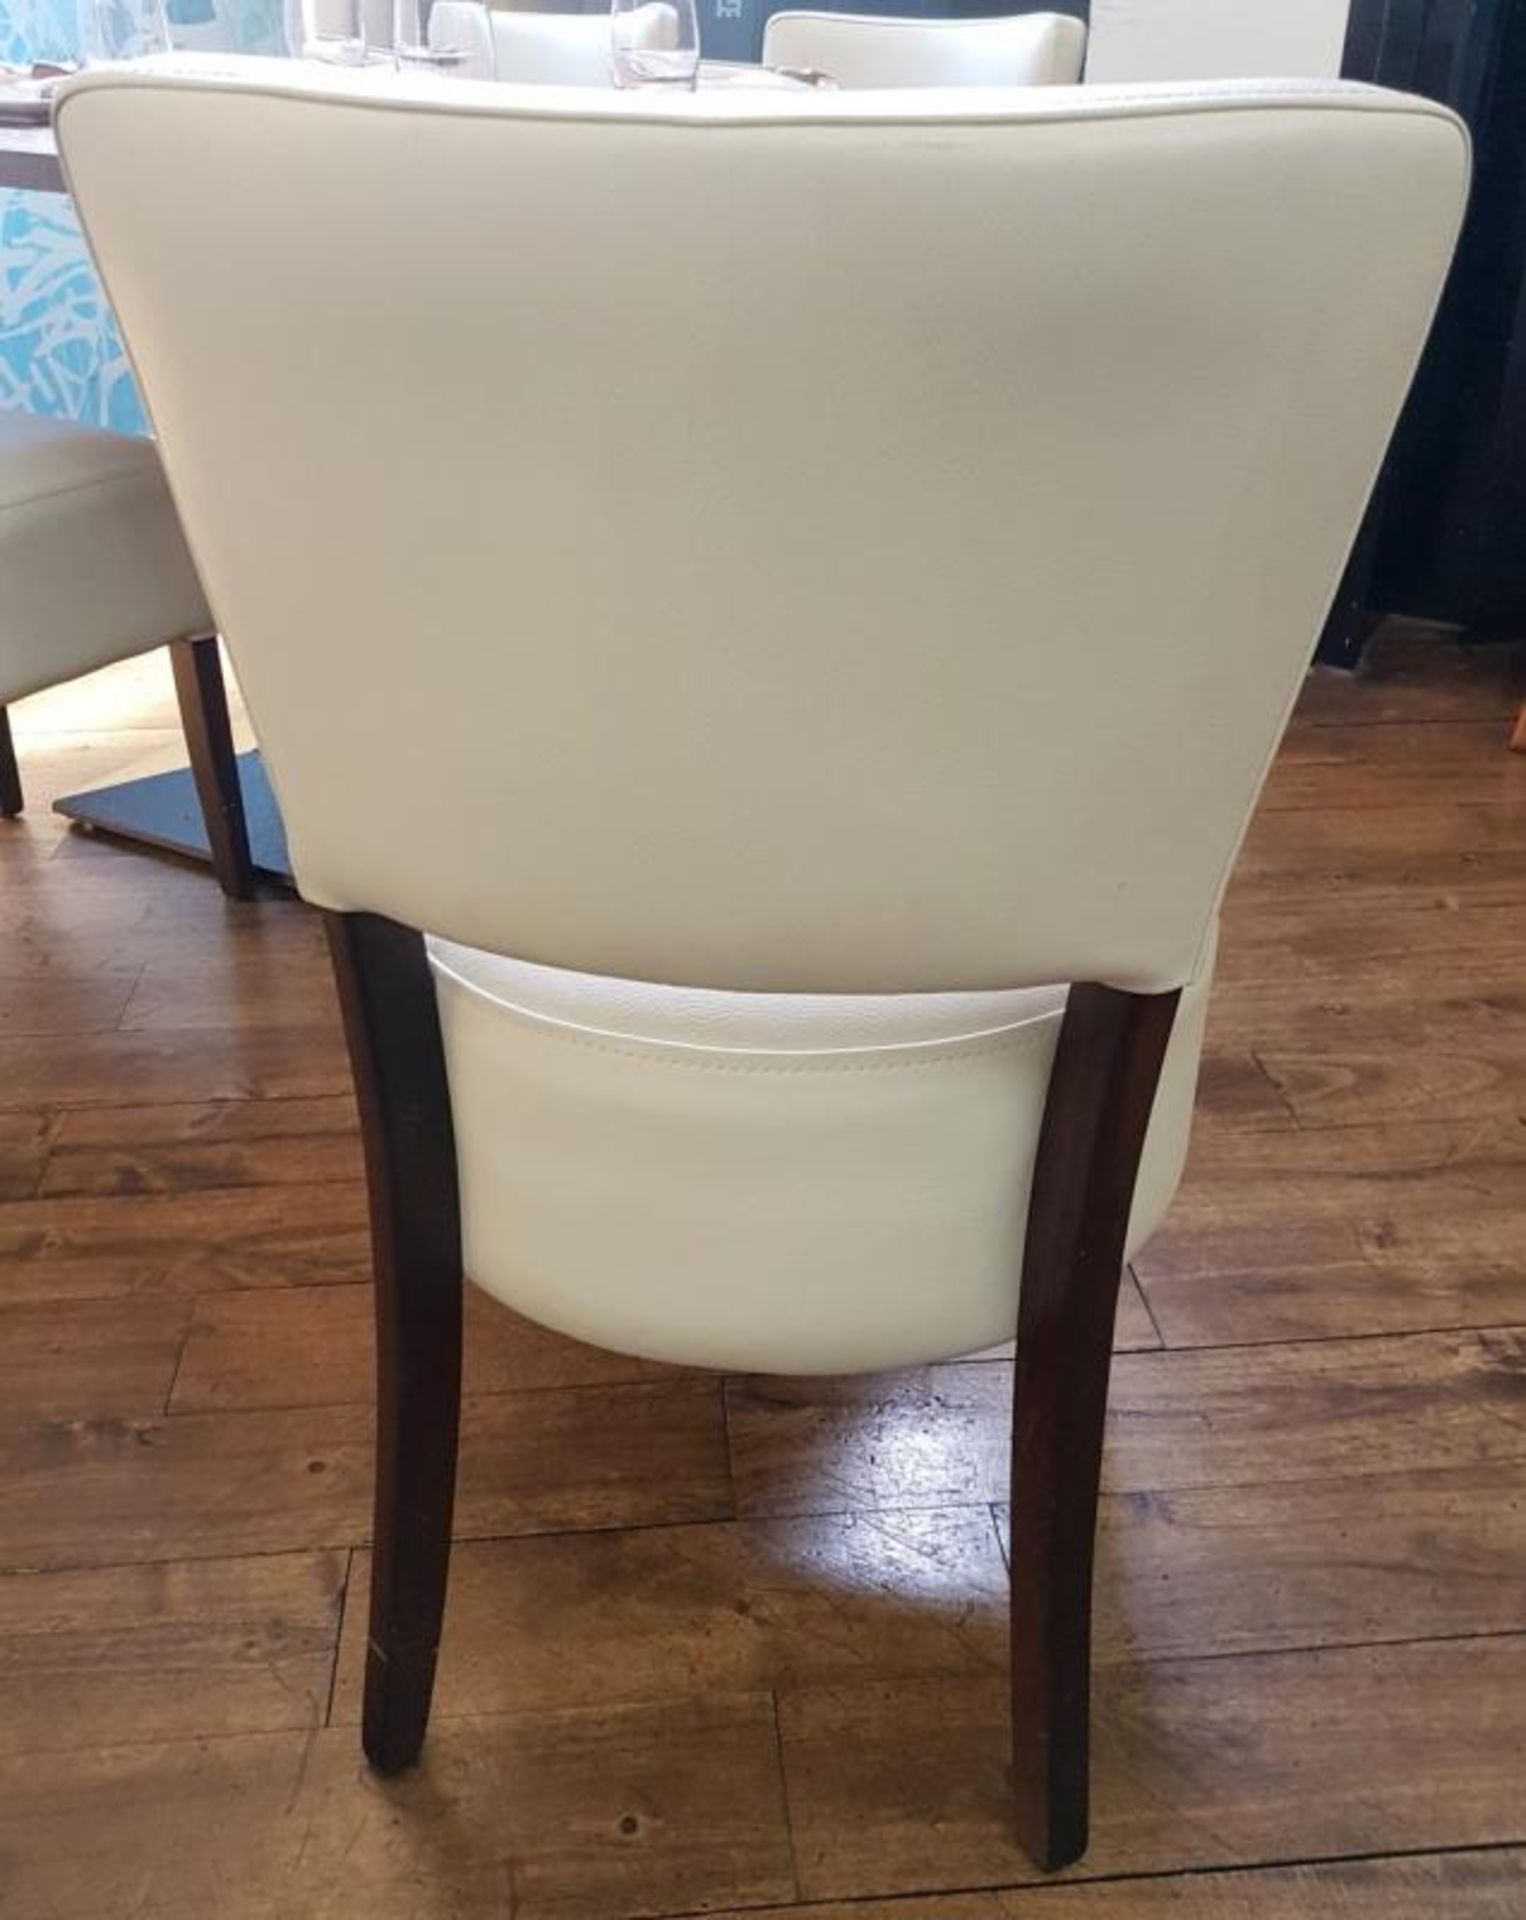 20 x Cream Faux Leather Chairs From Restaurant - Ref: KR20 - CL345 - Location: Altrincham - Image 4 of 5